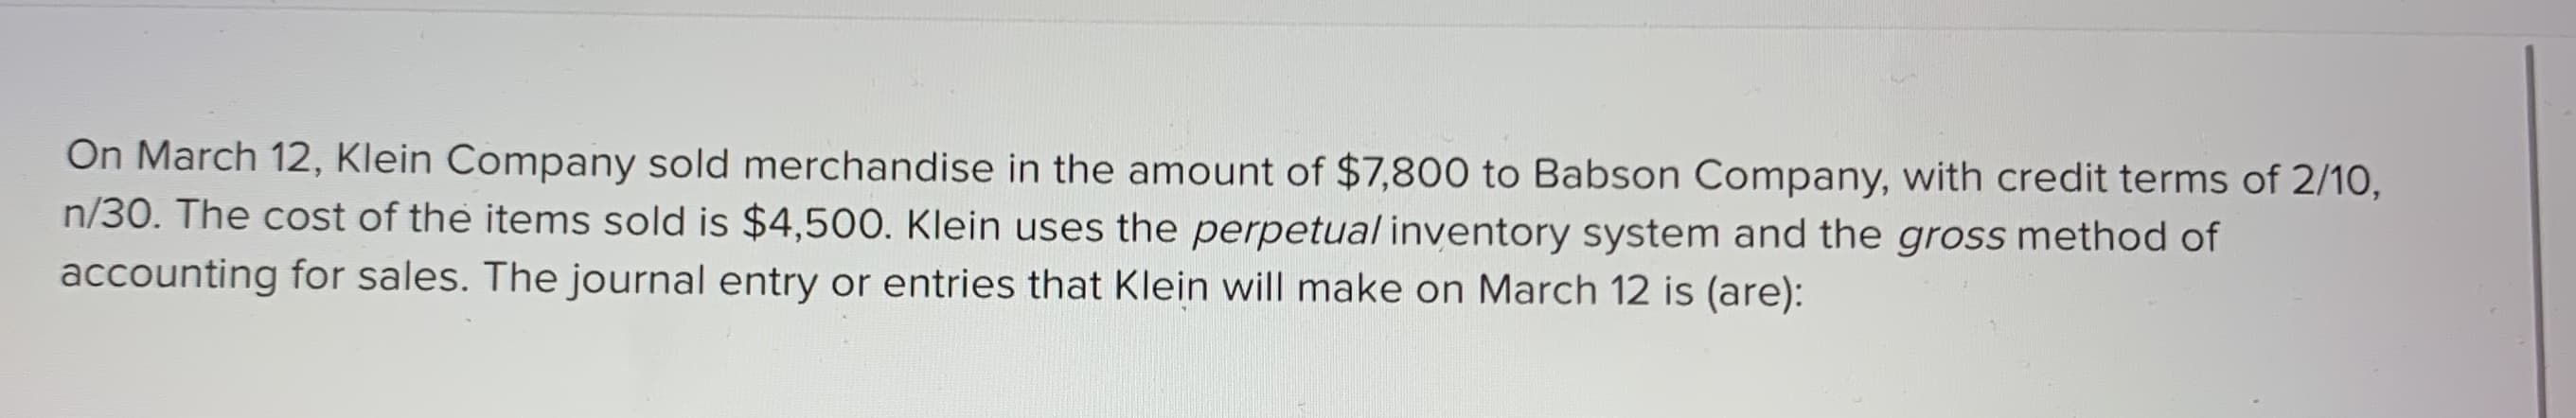 On March 12, Klein Company sold merchandise in the amount of $7,800 to Babson Company, with credit terms of 2/10,
n/30. The cost of the items sold is $4,500. Klein uses the perpetual inventory system and the gross method of
accounting for sales. The journal entry or entries that Klein will make on March 12 is (are):
